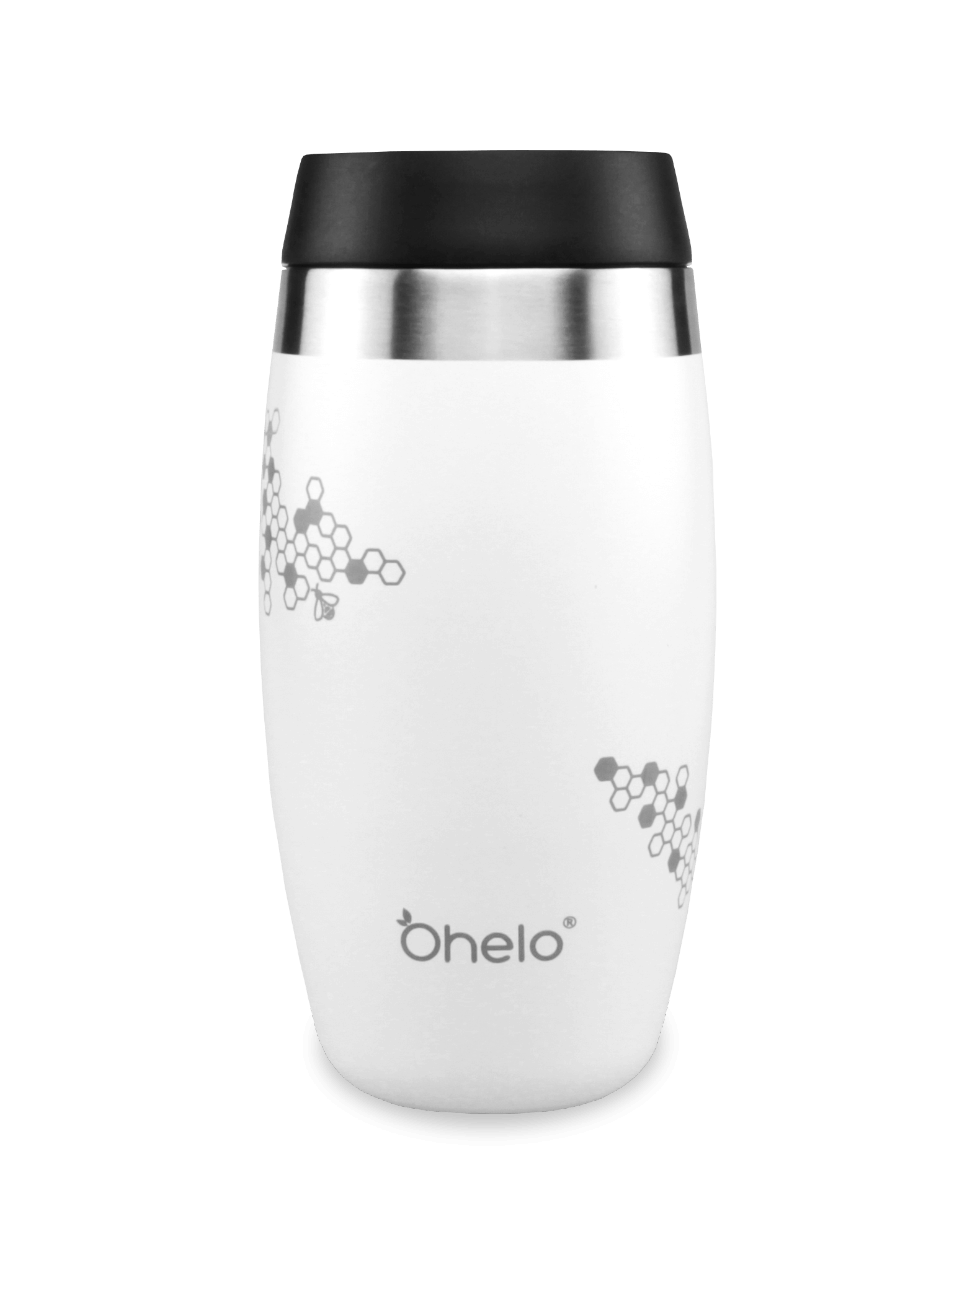 Ohelo insulated reusable travel mug with sip lid in white with laser etched honeycomb and bee design